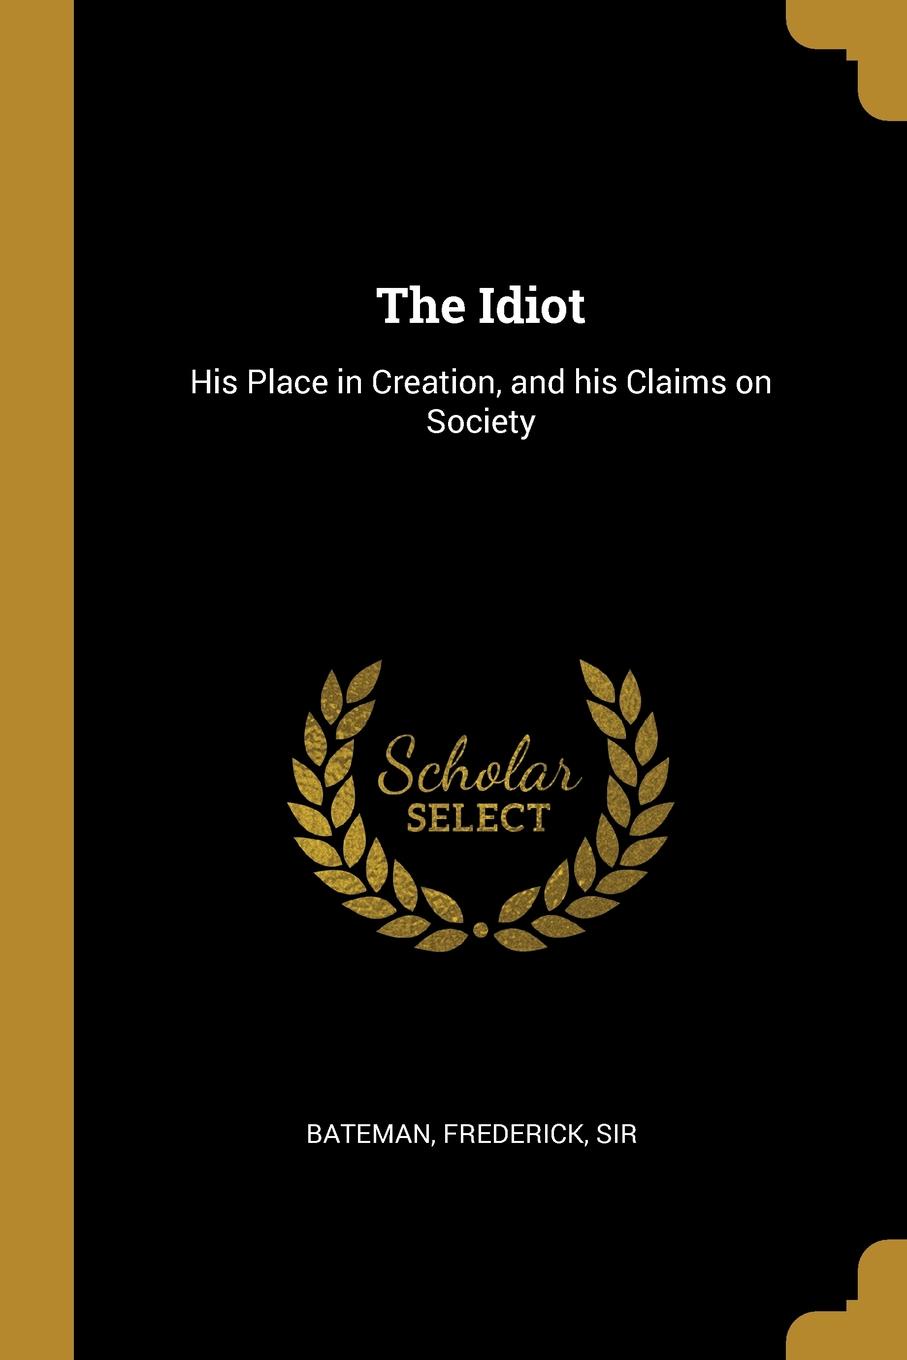 The Idiot. His Place in Creation, and his Claims on Society